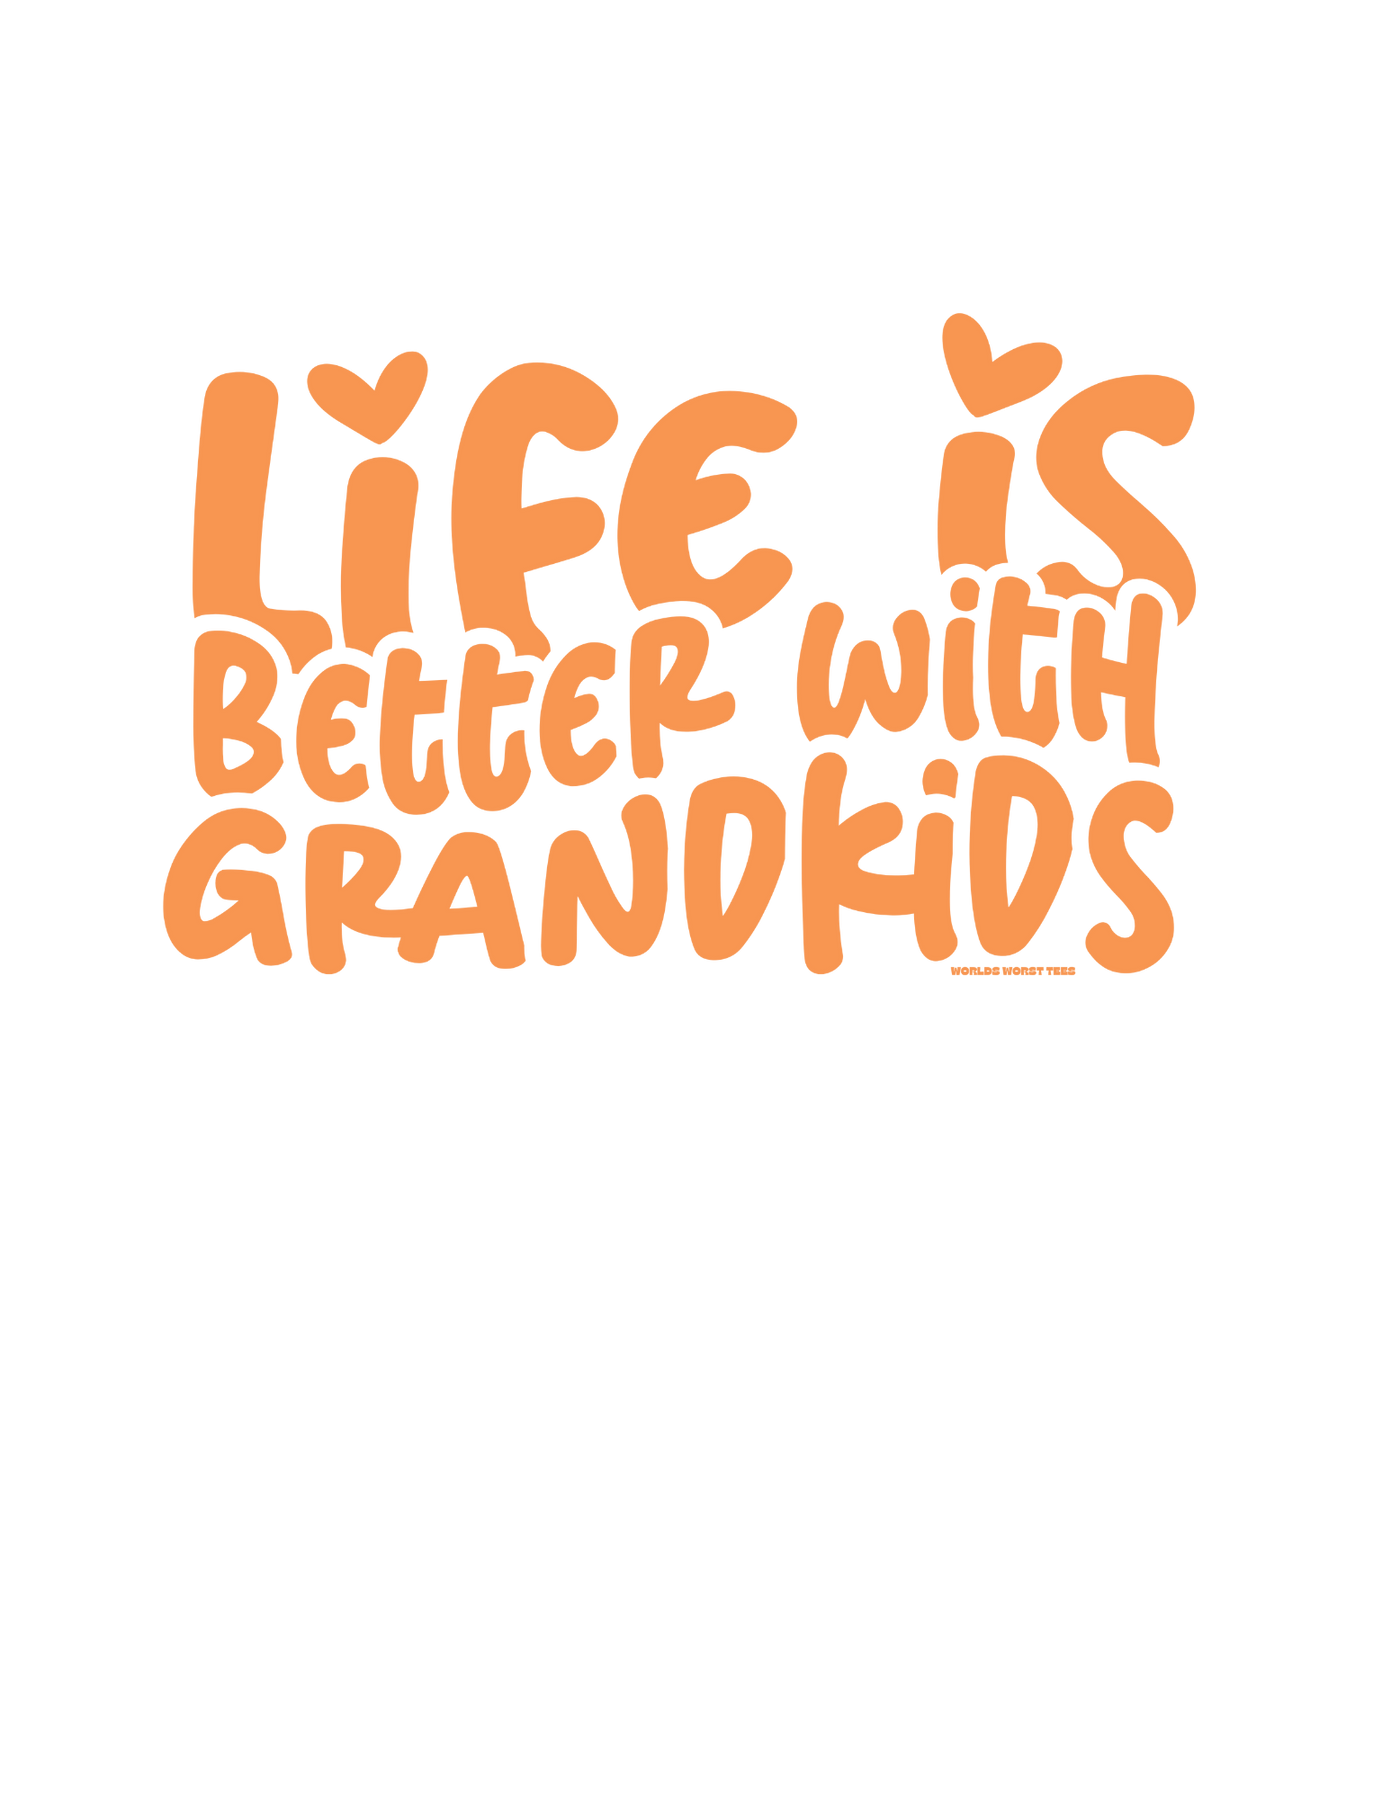 Life is Better With Grandkids Crew